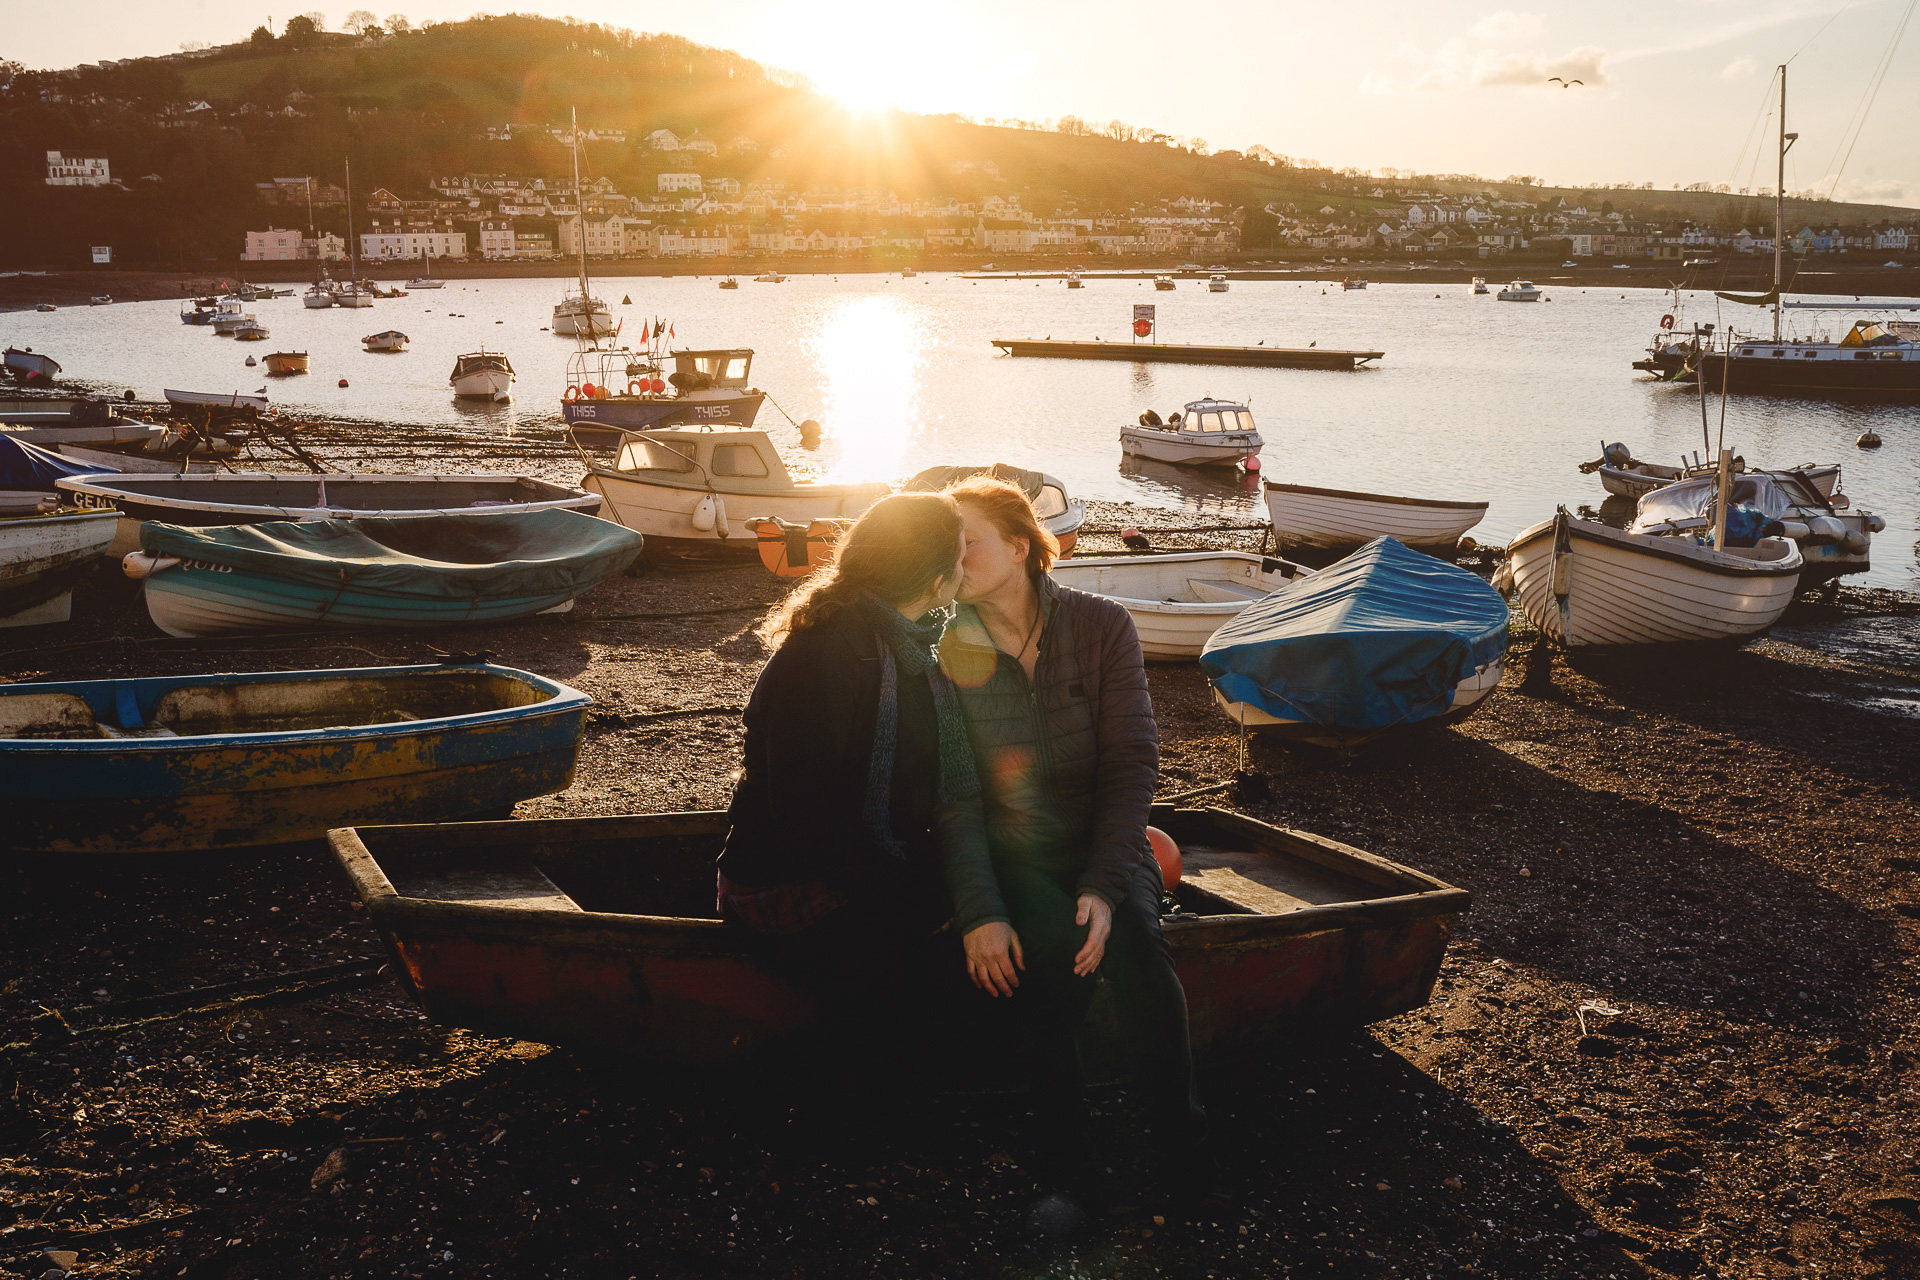 Two women sitting on a boat together kissing in a sunset